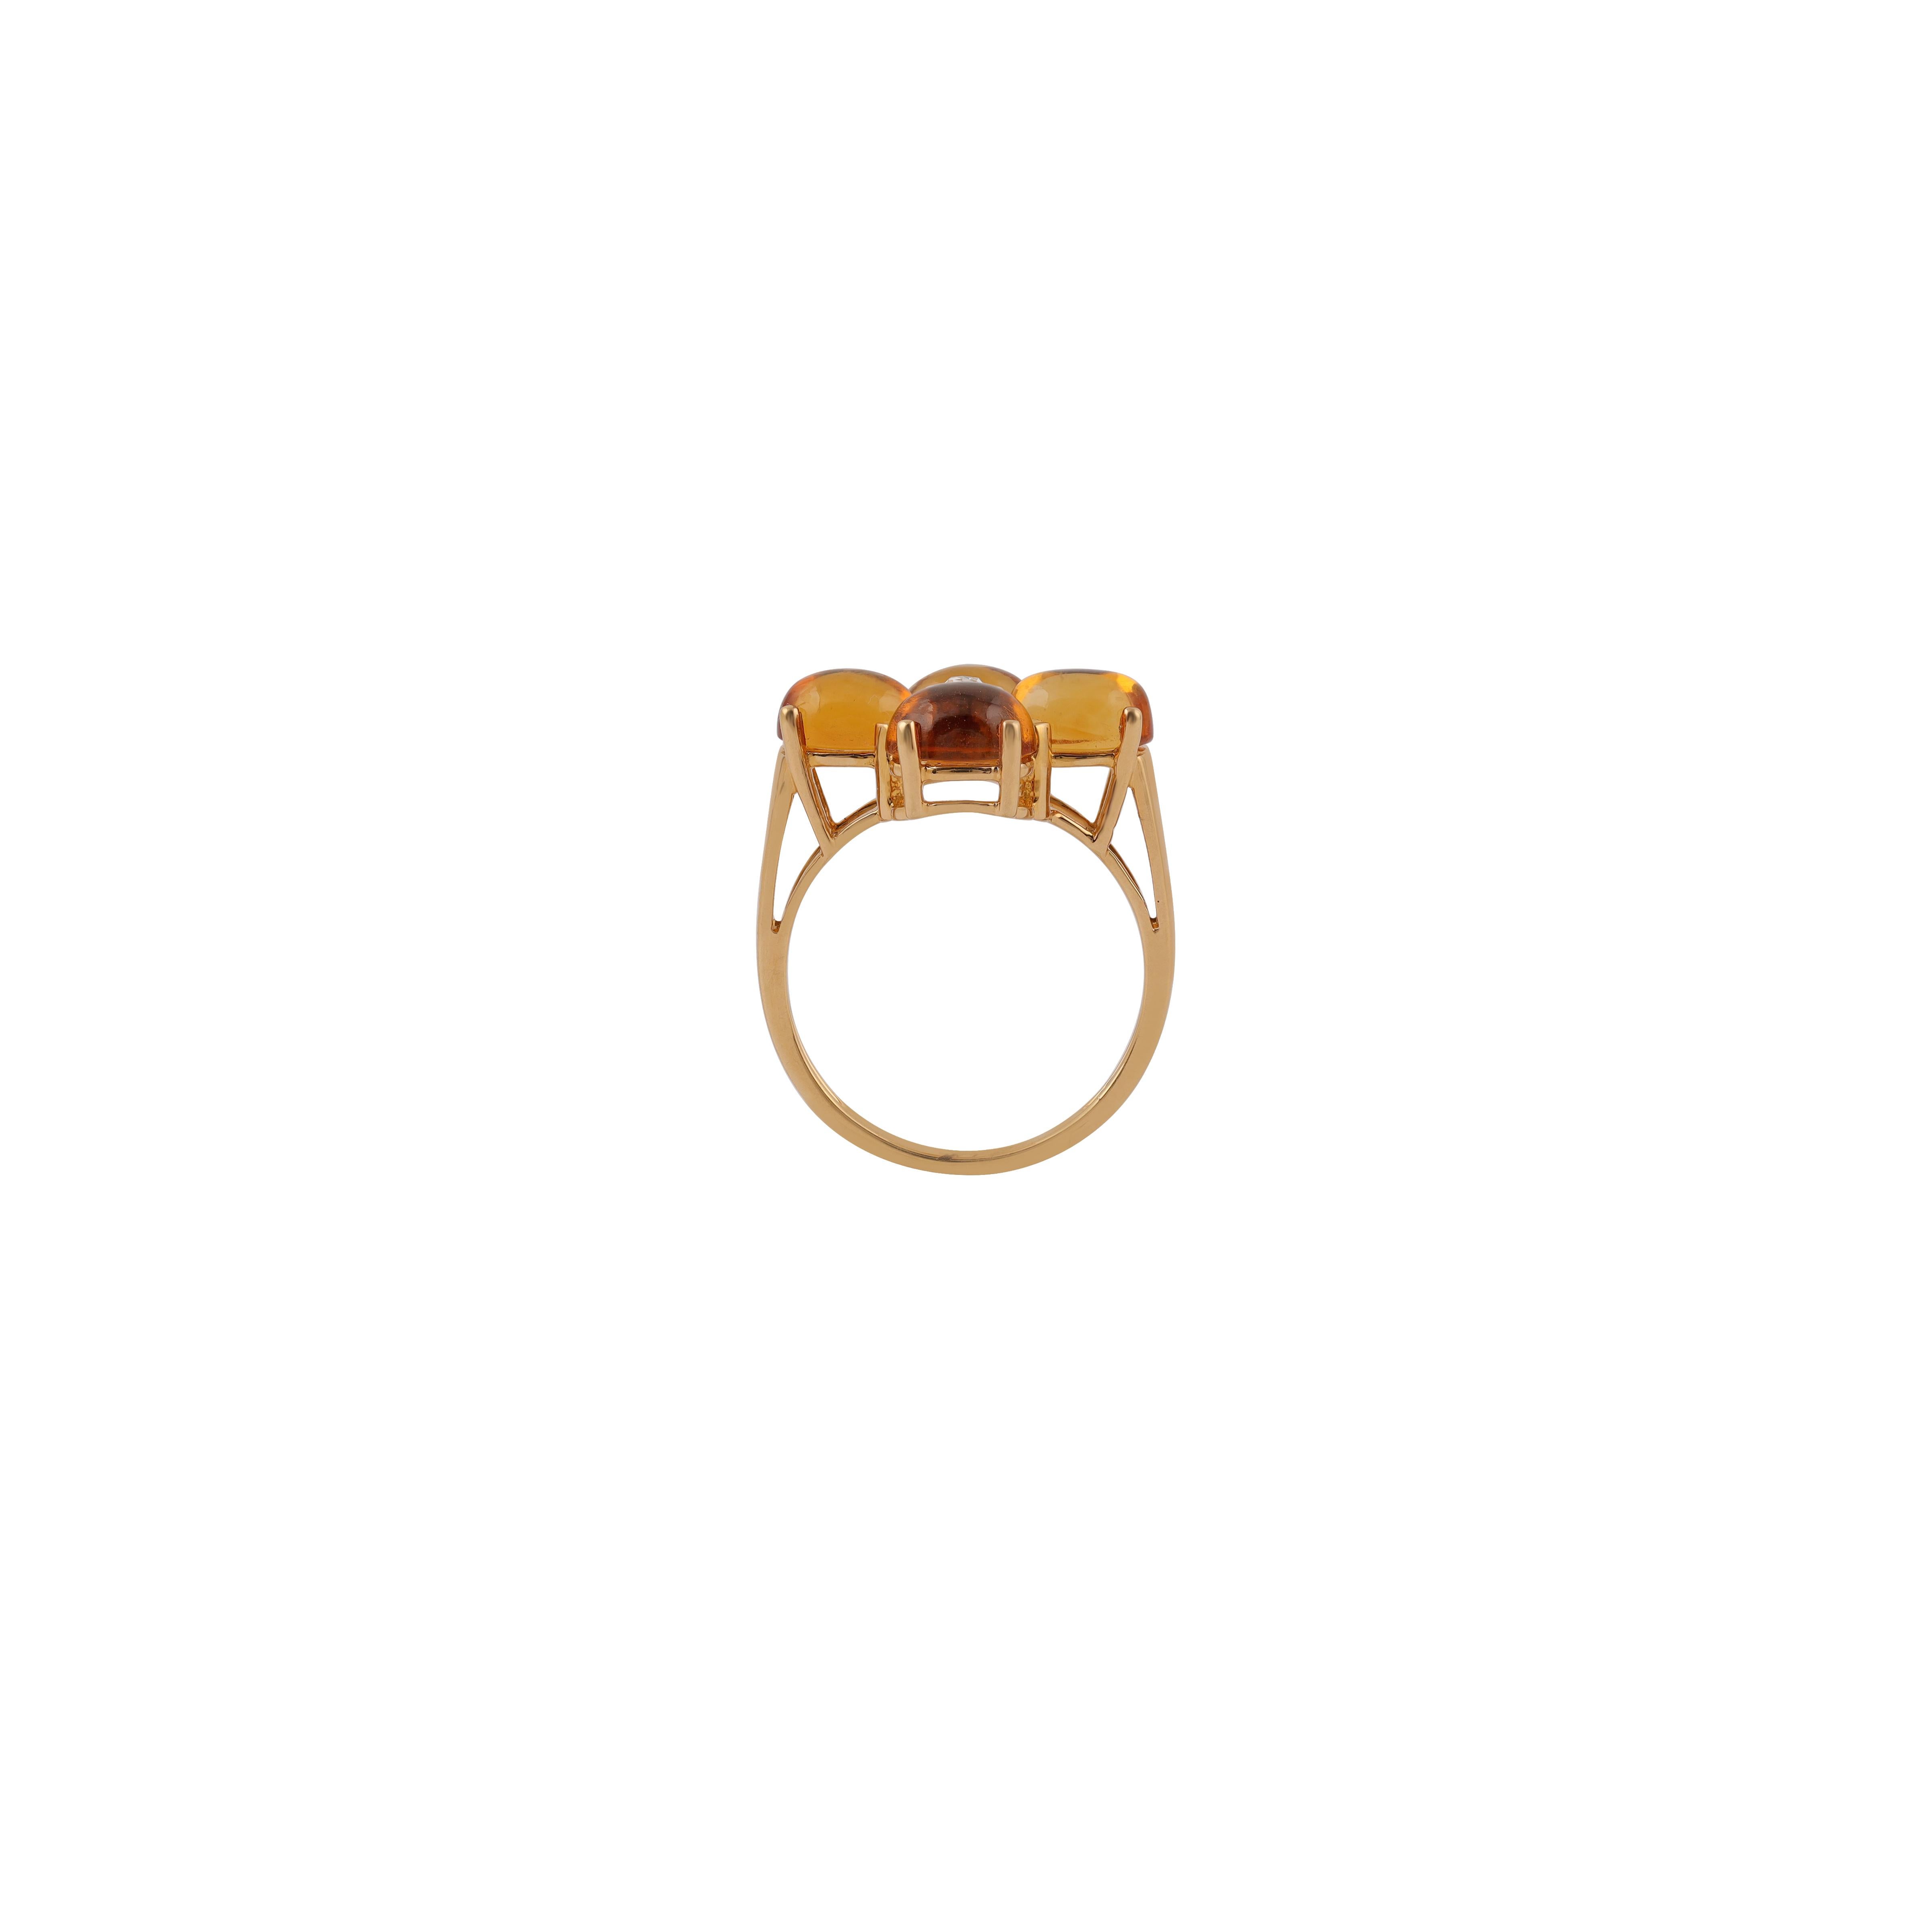 4.01 Carat Clear Citrine & Diamond Ring in 18k Gold For Sale 1